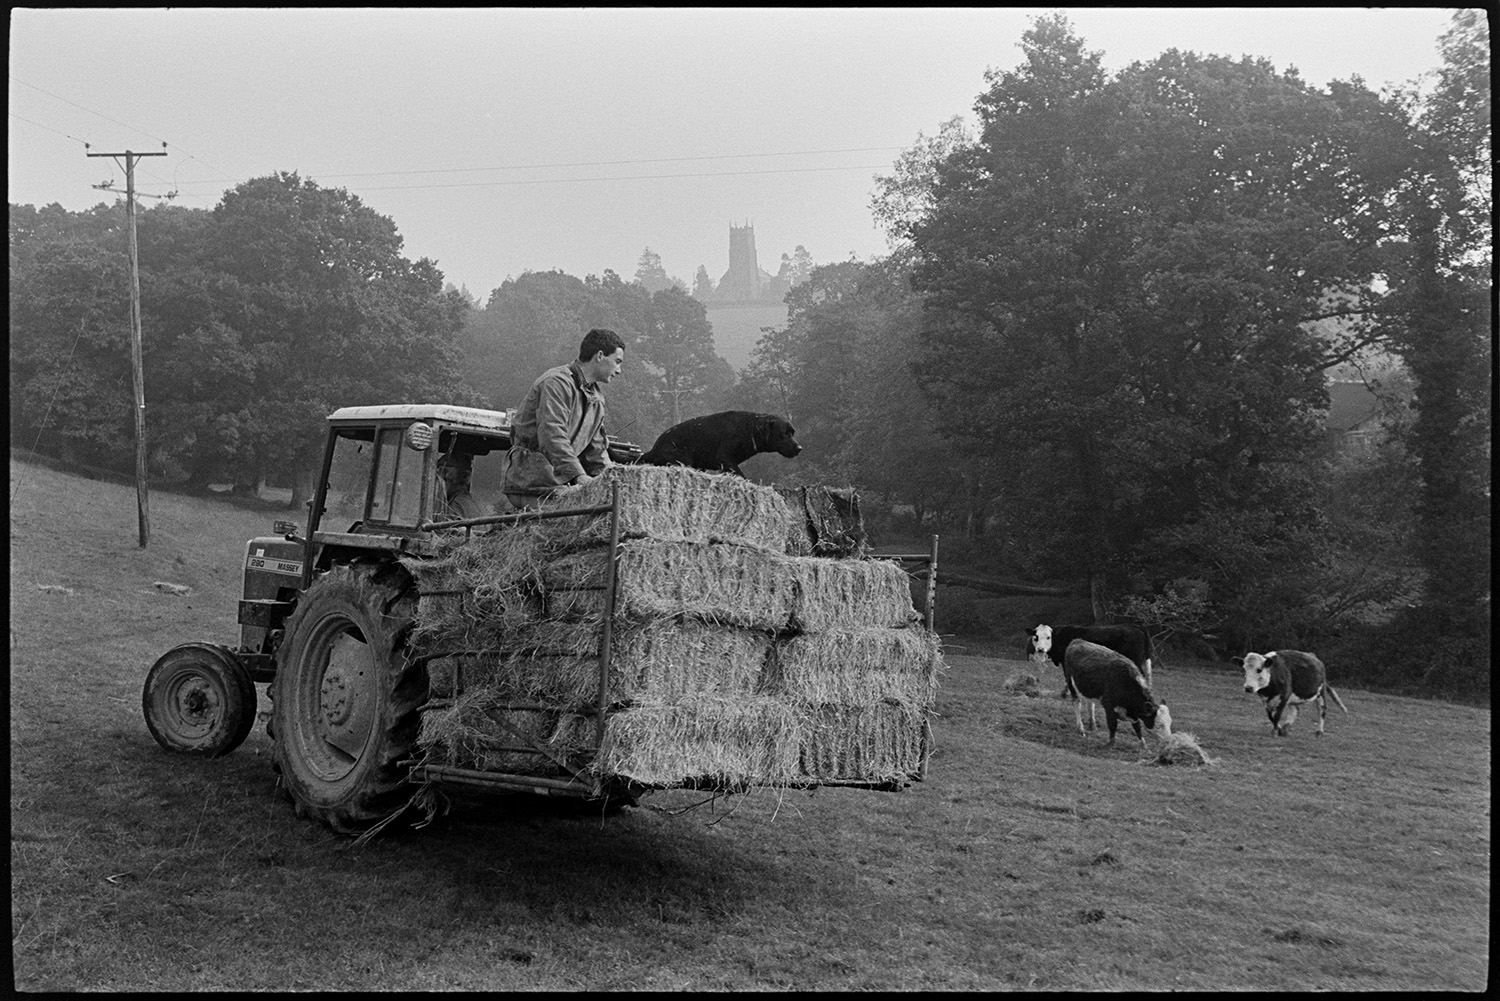 Farmer feeding hay to bullocks. 
[A man feeding hay to bullocks in a field at Westpark, Iddesleigh, from a link box attached to a tractor. A dog is with him and another person is driving the tractor. Iddesleigh Church tower can be seen in the background through trees.]